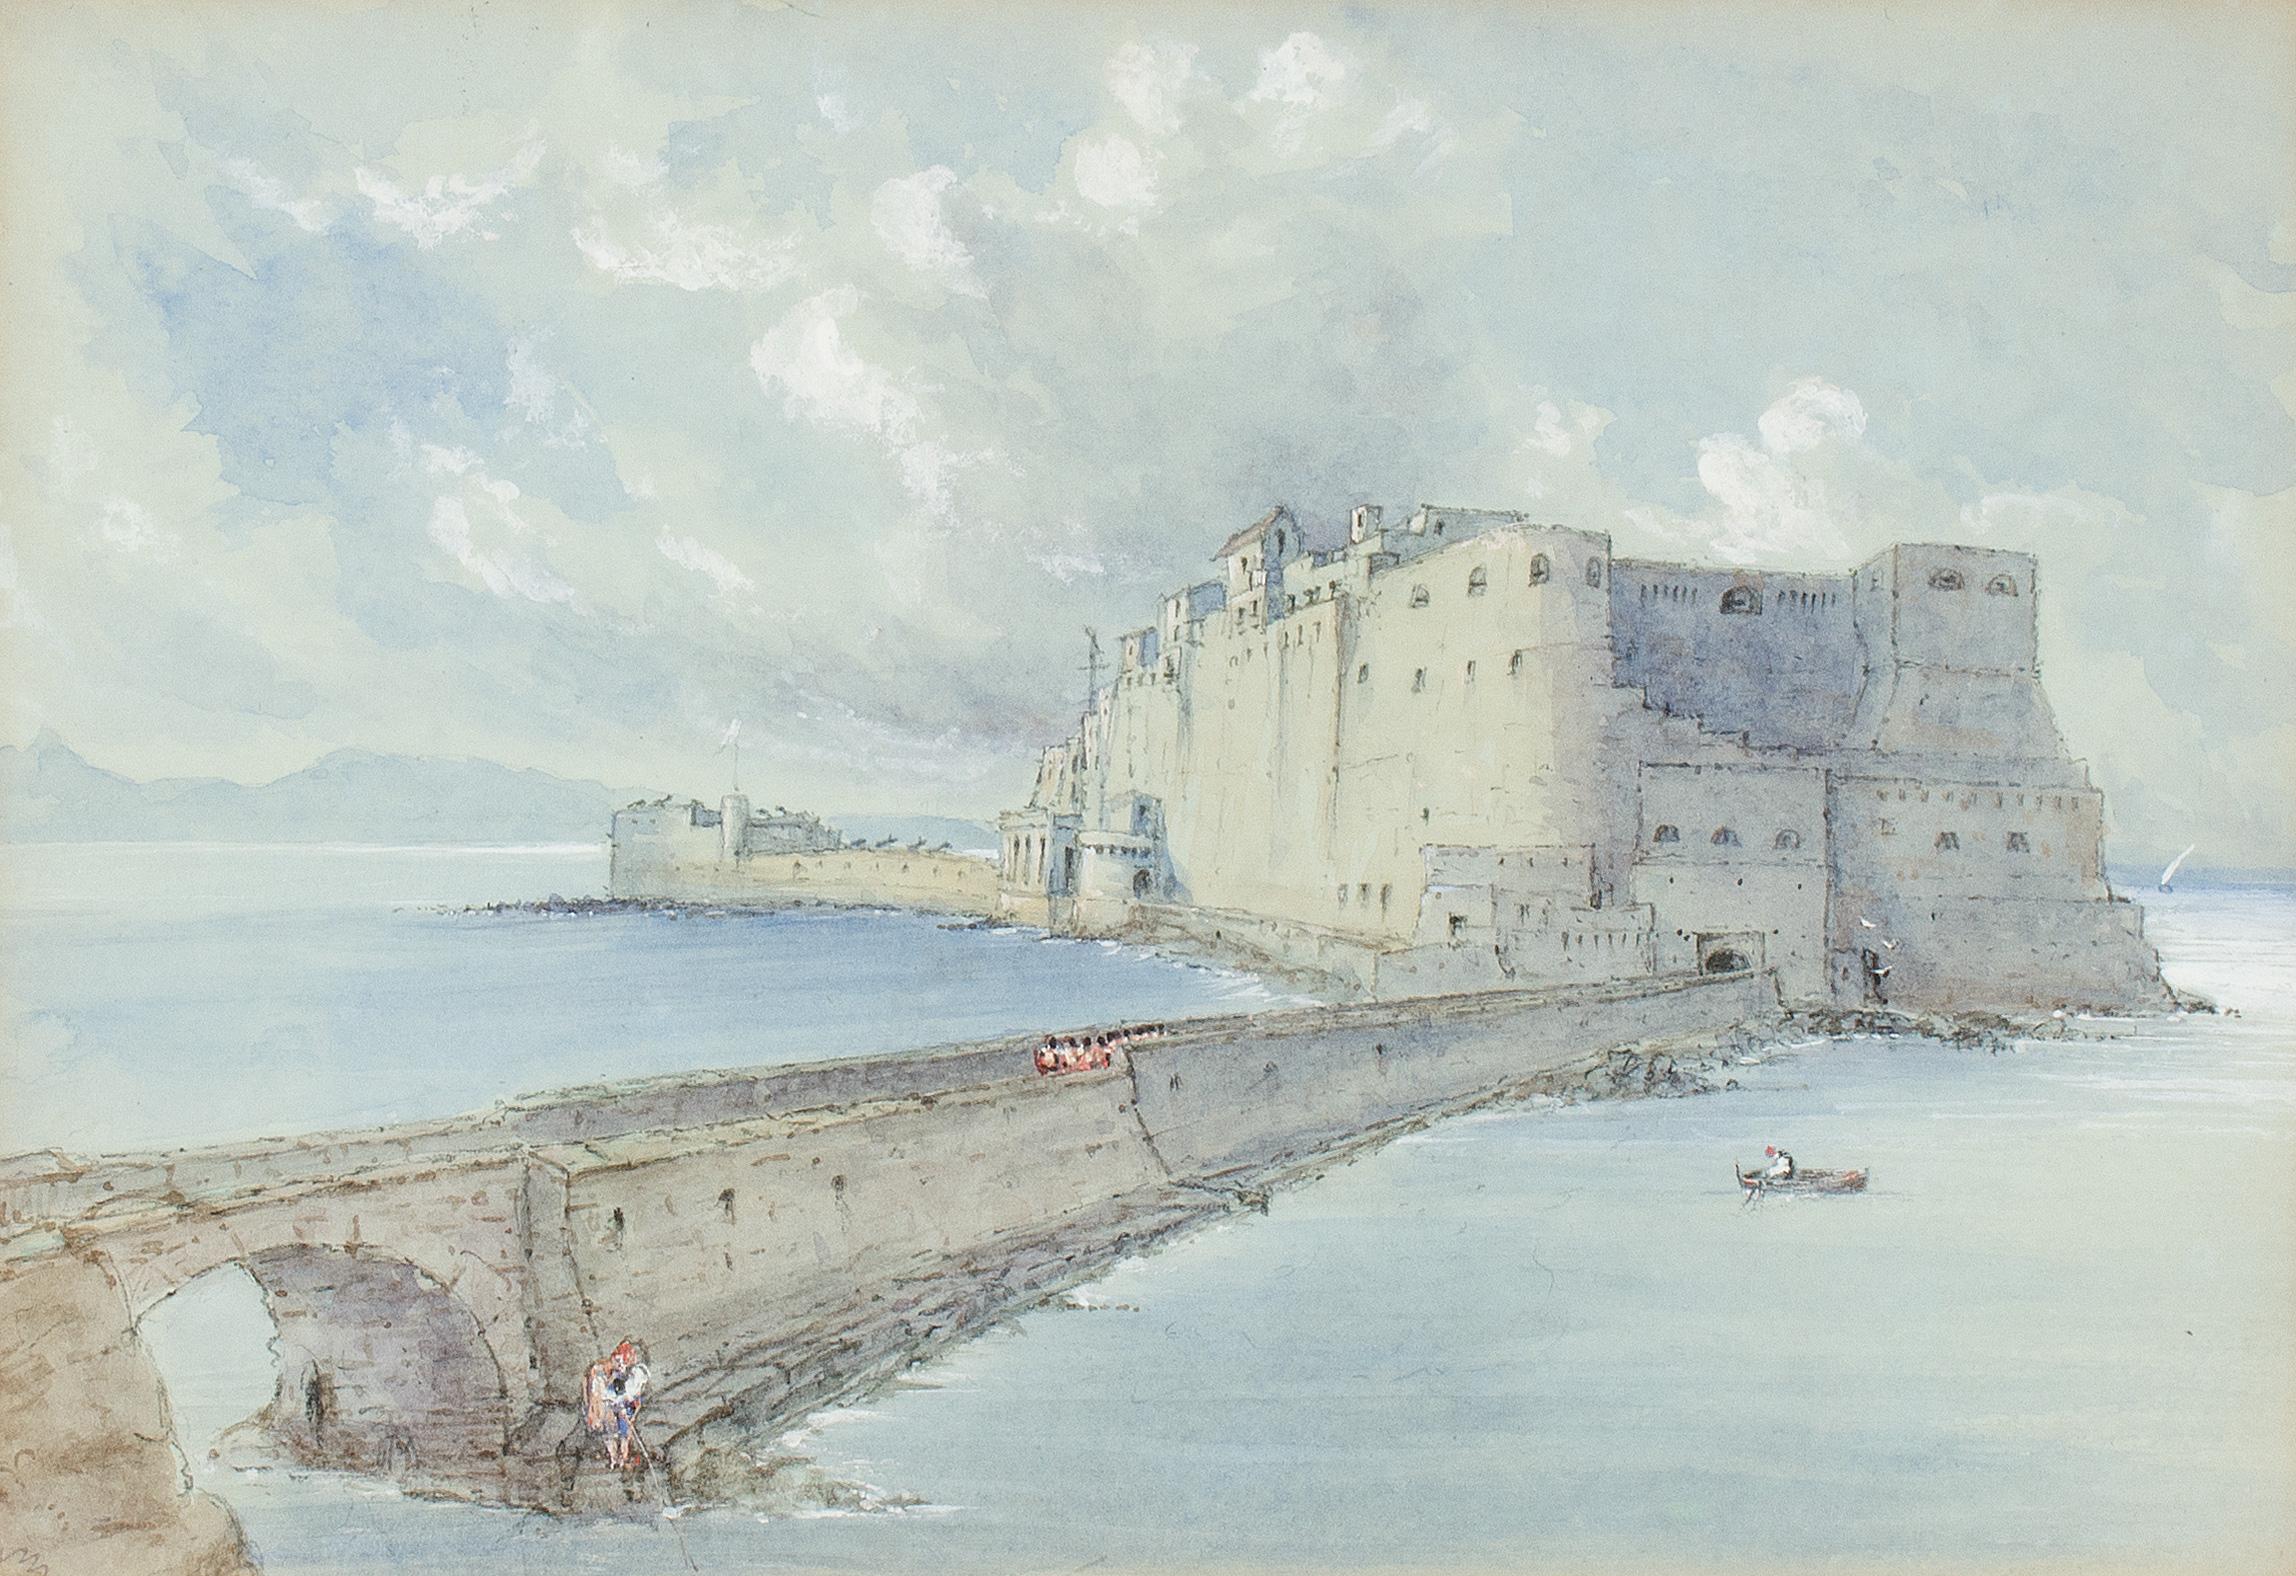 Edward J. Howman
(English, nineteenth century)
Castel dell'Ovo, Naples, 1851

Watercolor and gouache on paper, 7 x 10 inches
Framed: 12 x 15 inches (approx.)
Label on backing verso: (in ink) “